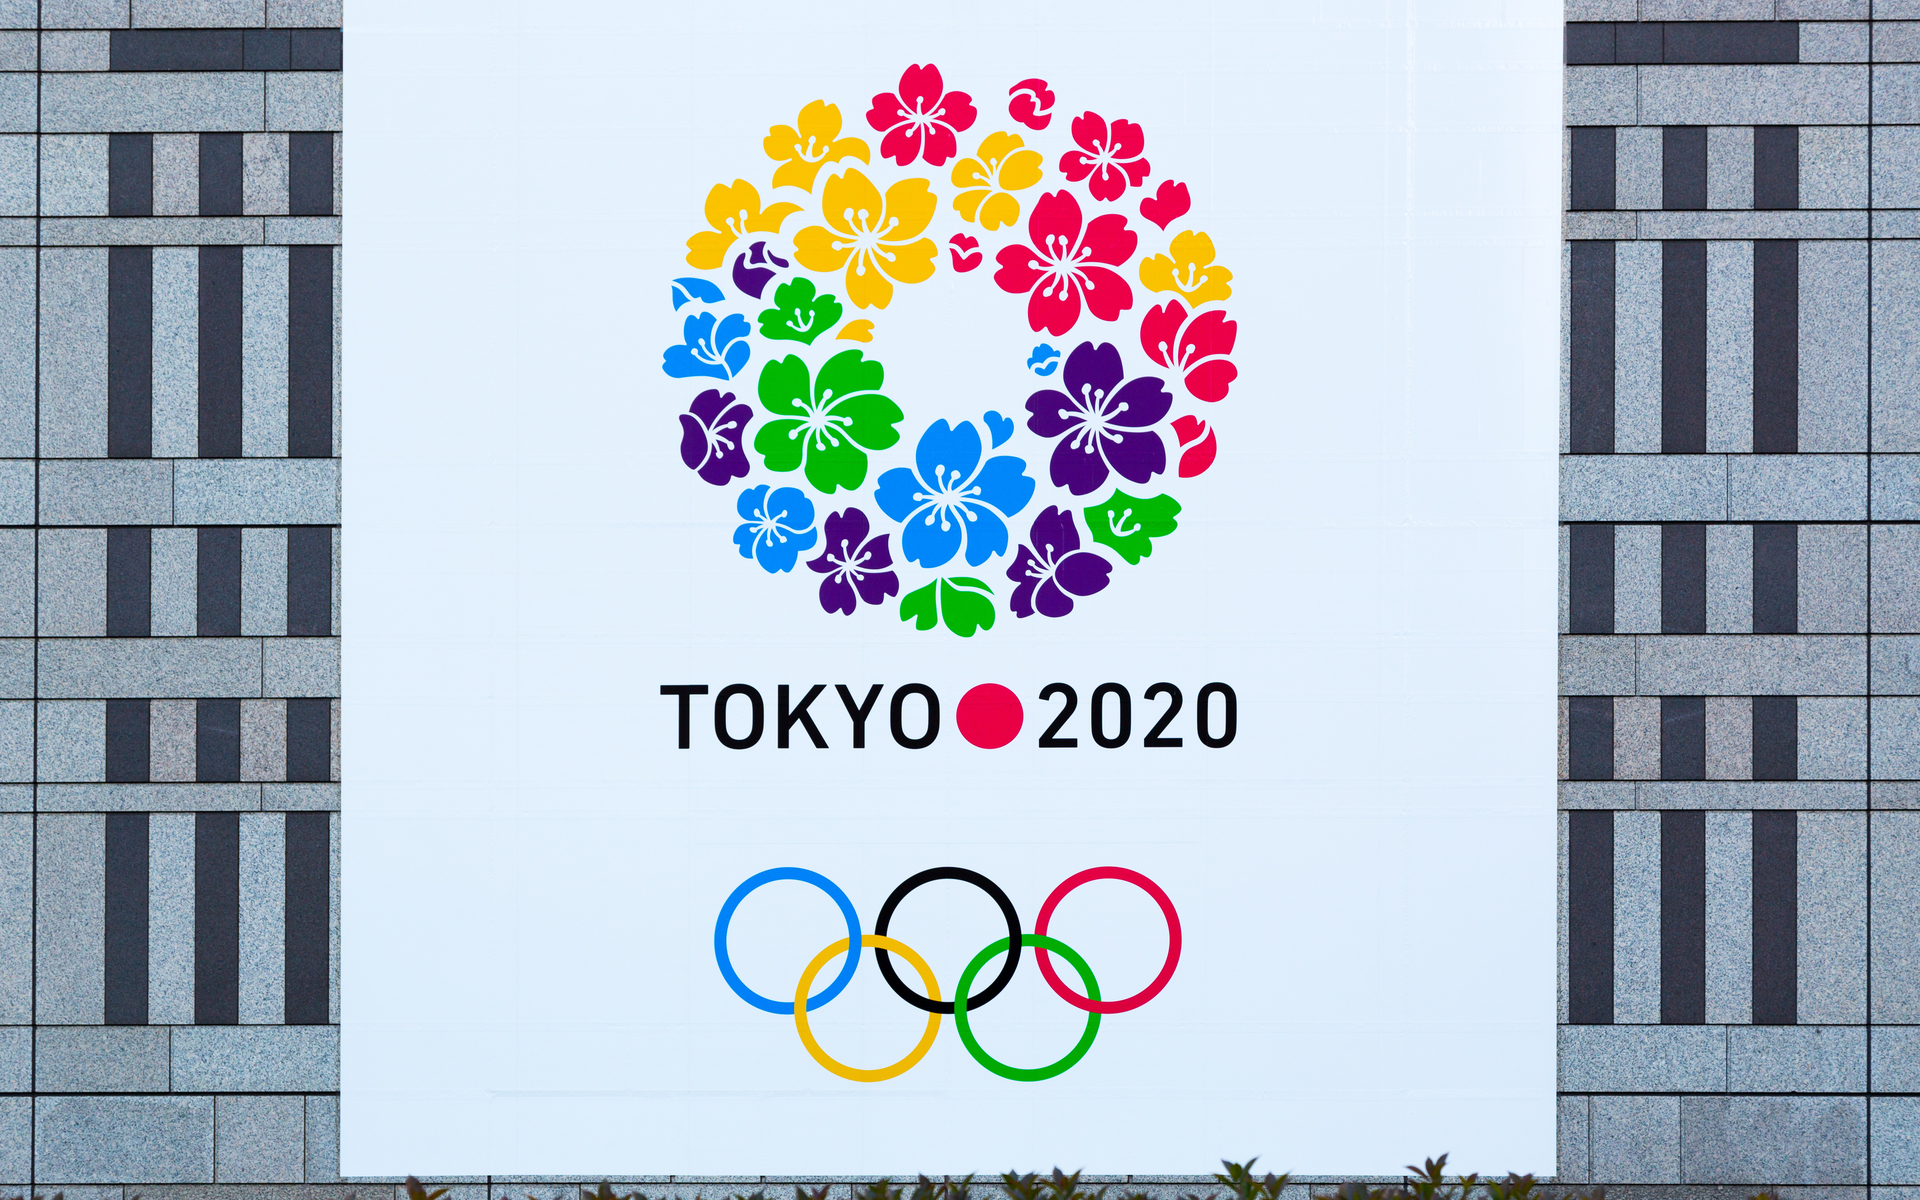 The Announcement To Make XRP Official Cryptocurrency of Olympic Games In Tokyo 2020 Is Gaining more than 7,500 Signatures